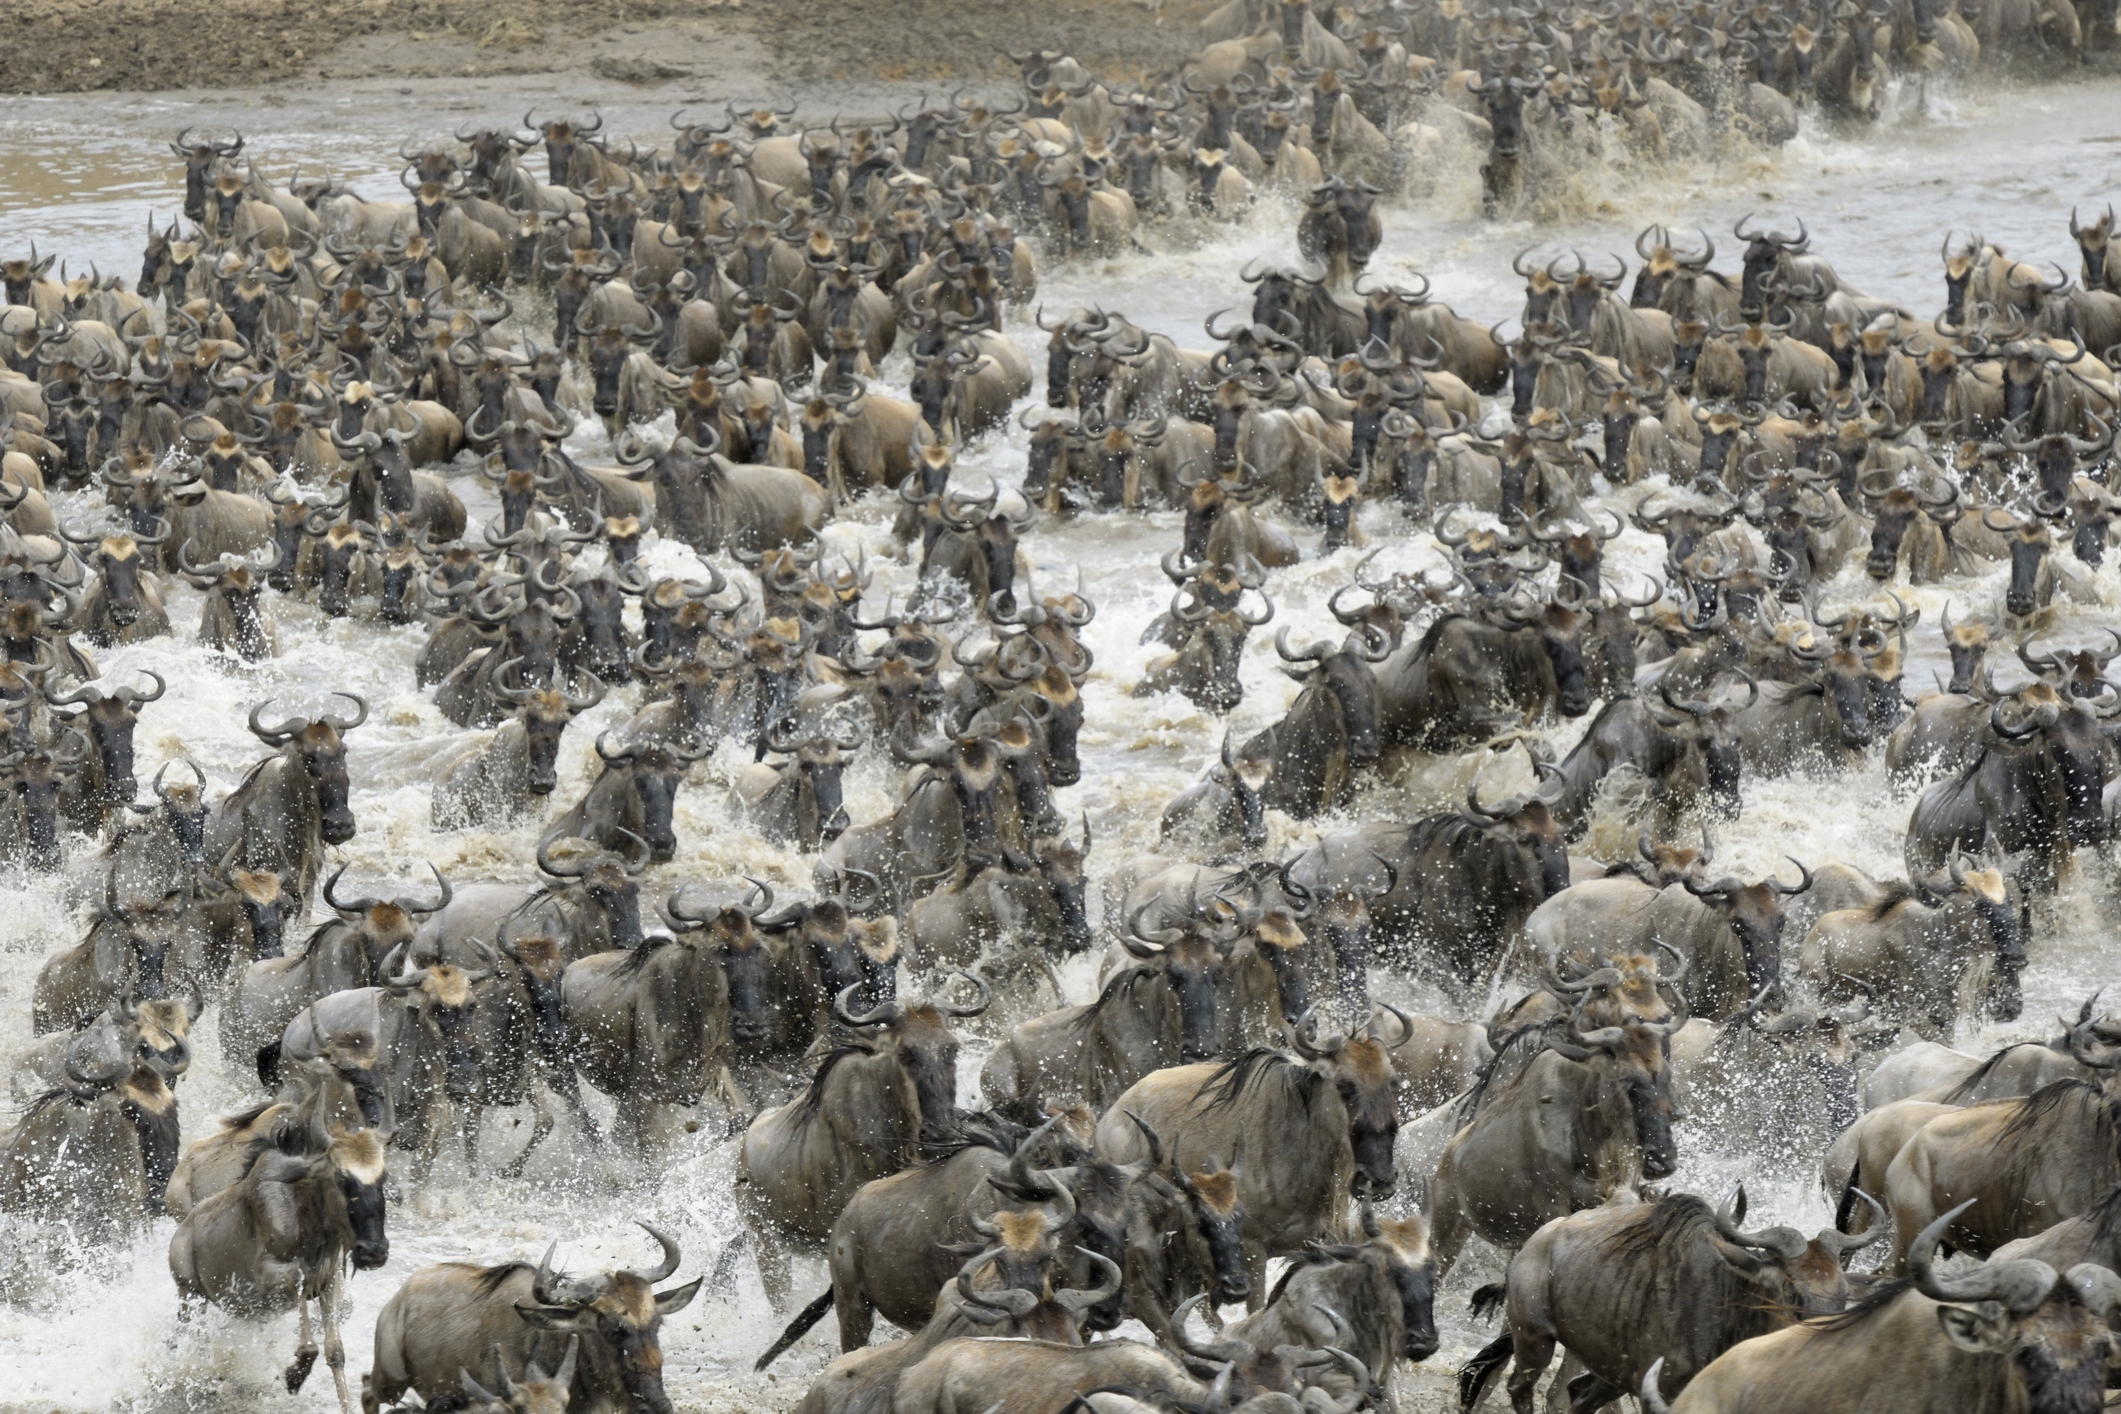 Witness the Wildebeest and Zebra Migration in the Serengeti National Park this coming season